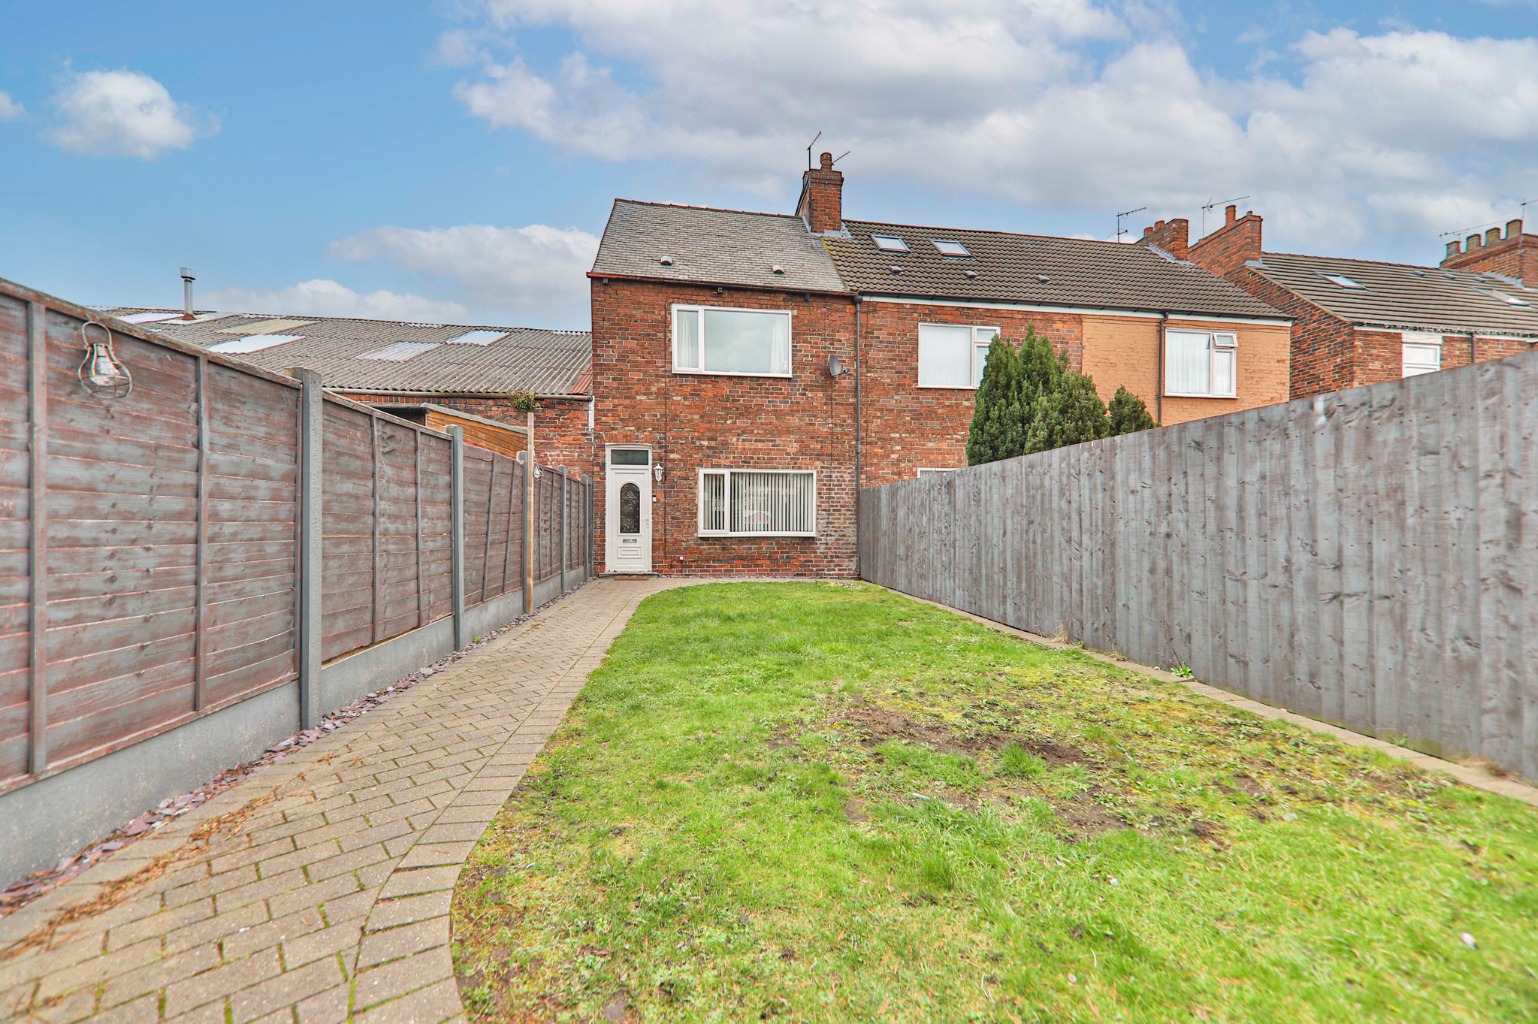 End of terrace house in South View, Anlaby Common, Hull,  HU4 7SG